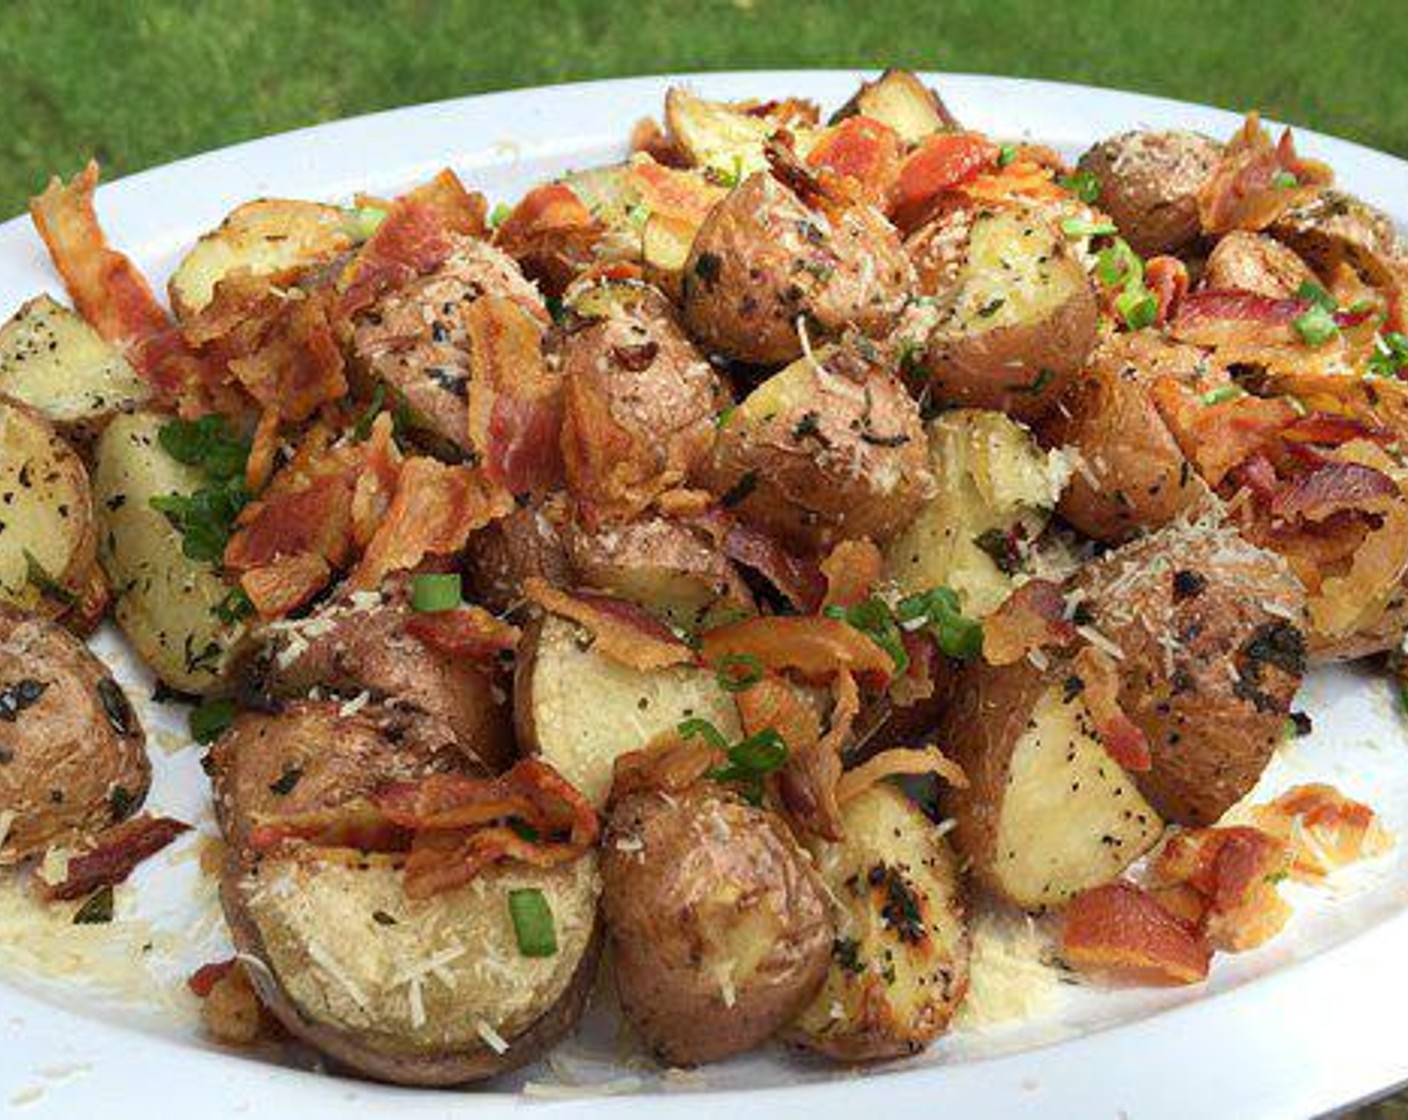 step 4 Once your roasted potatoes are off the smoker, put them on a serving platter and garnish with Grated Parmesan Cheese (1 cup) and crumbled bacon. These Parmesan Garlic Smoked Potatoes will the star of dinner.